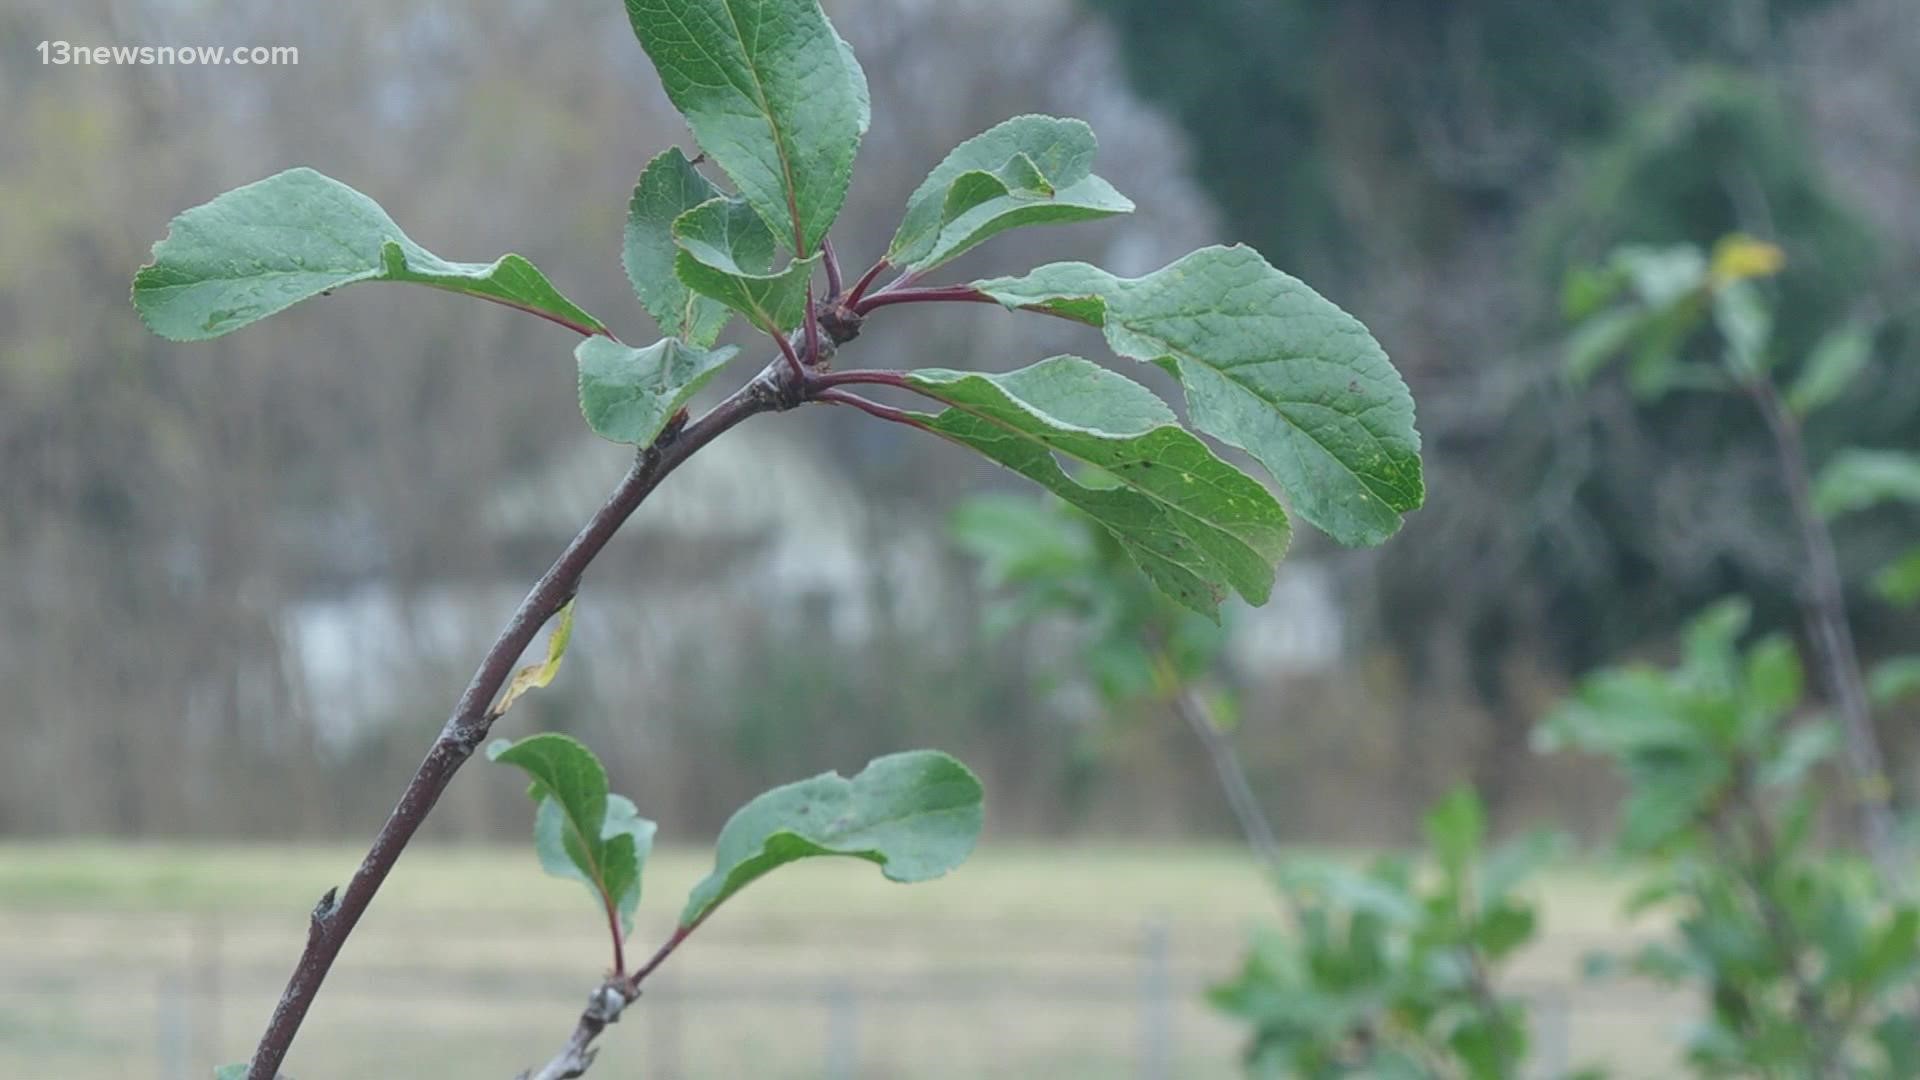 The Newport News Green Foundation recently acquired land to create a food forest.